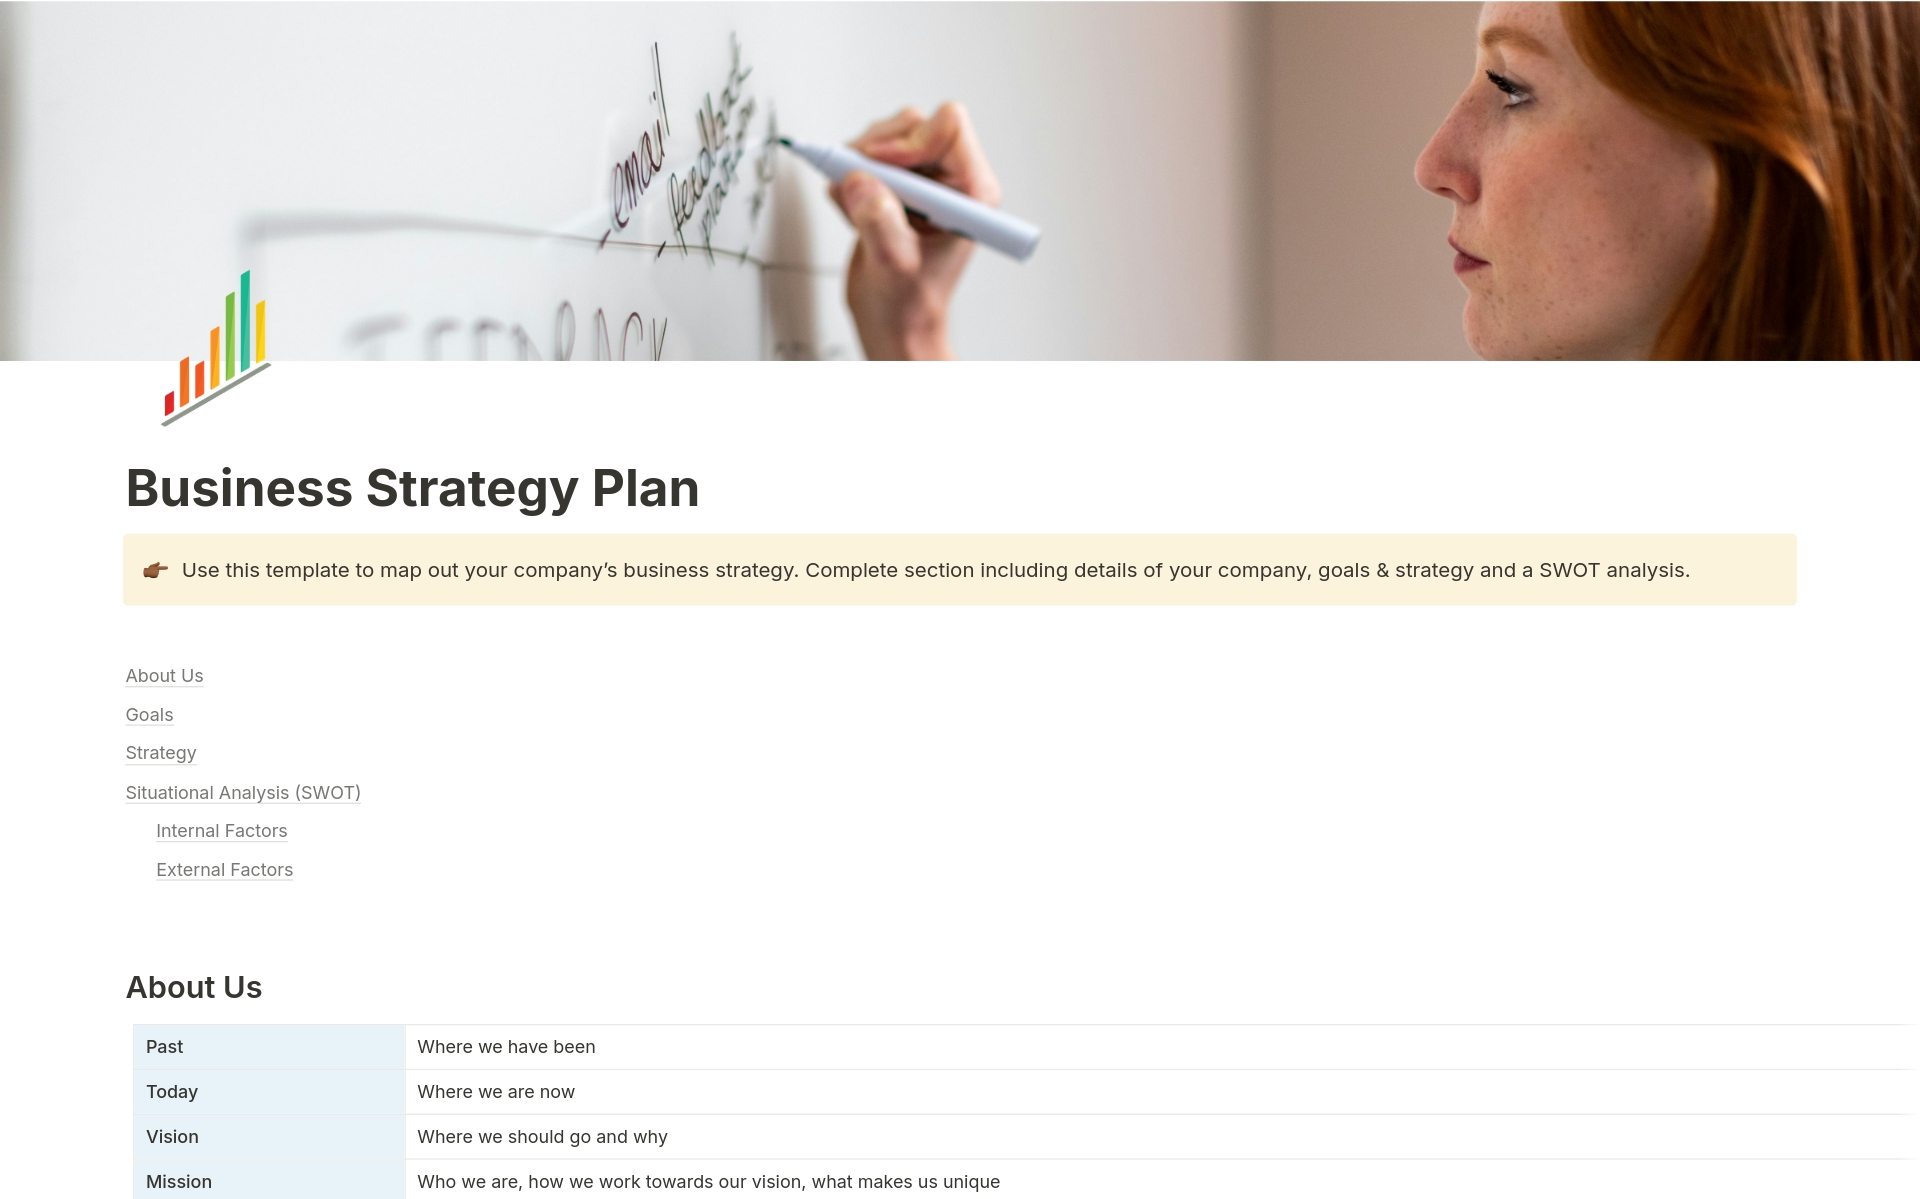 Strategic planning templates outline your key initiatives and the tasks that will help you achieve them.